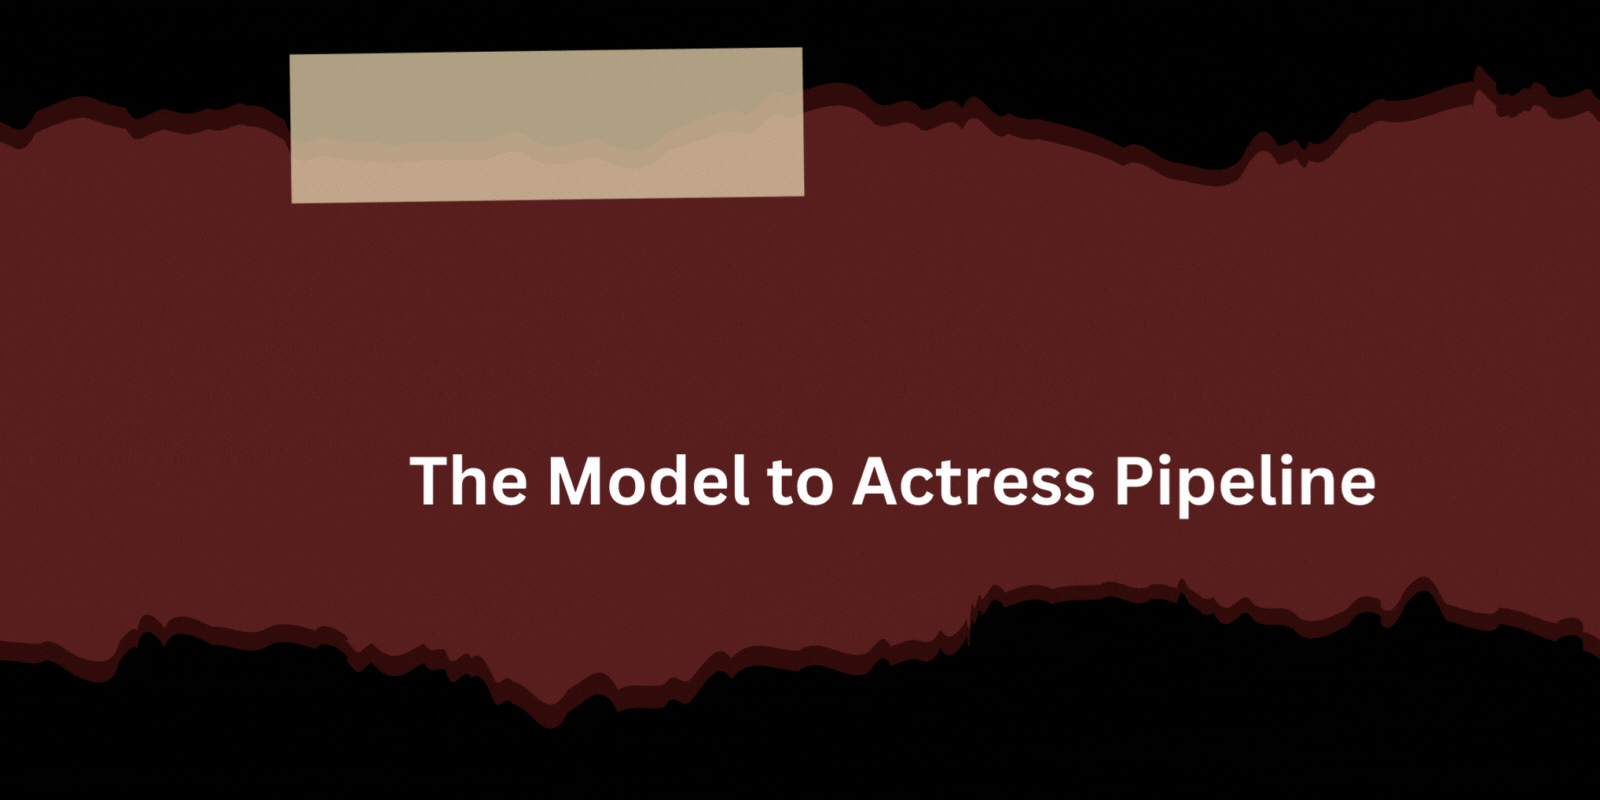 Adeline Rudolph: The Model to Actress Pipeline